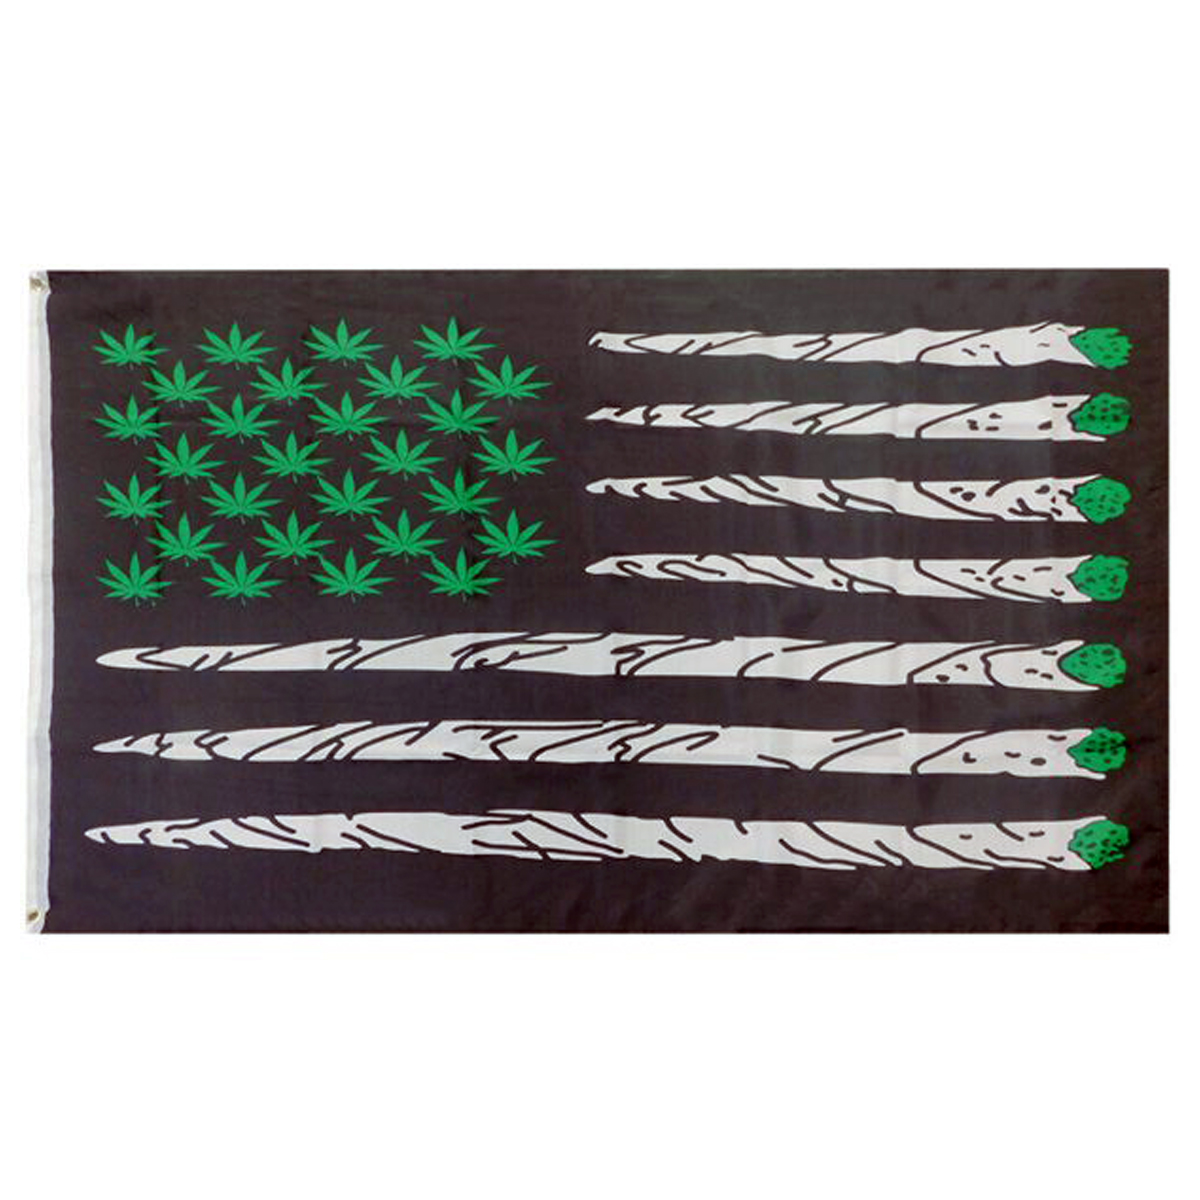 USA Weed Flag with Joints as Stripes